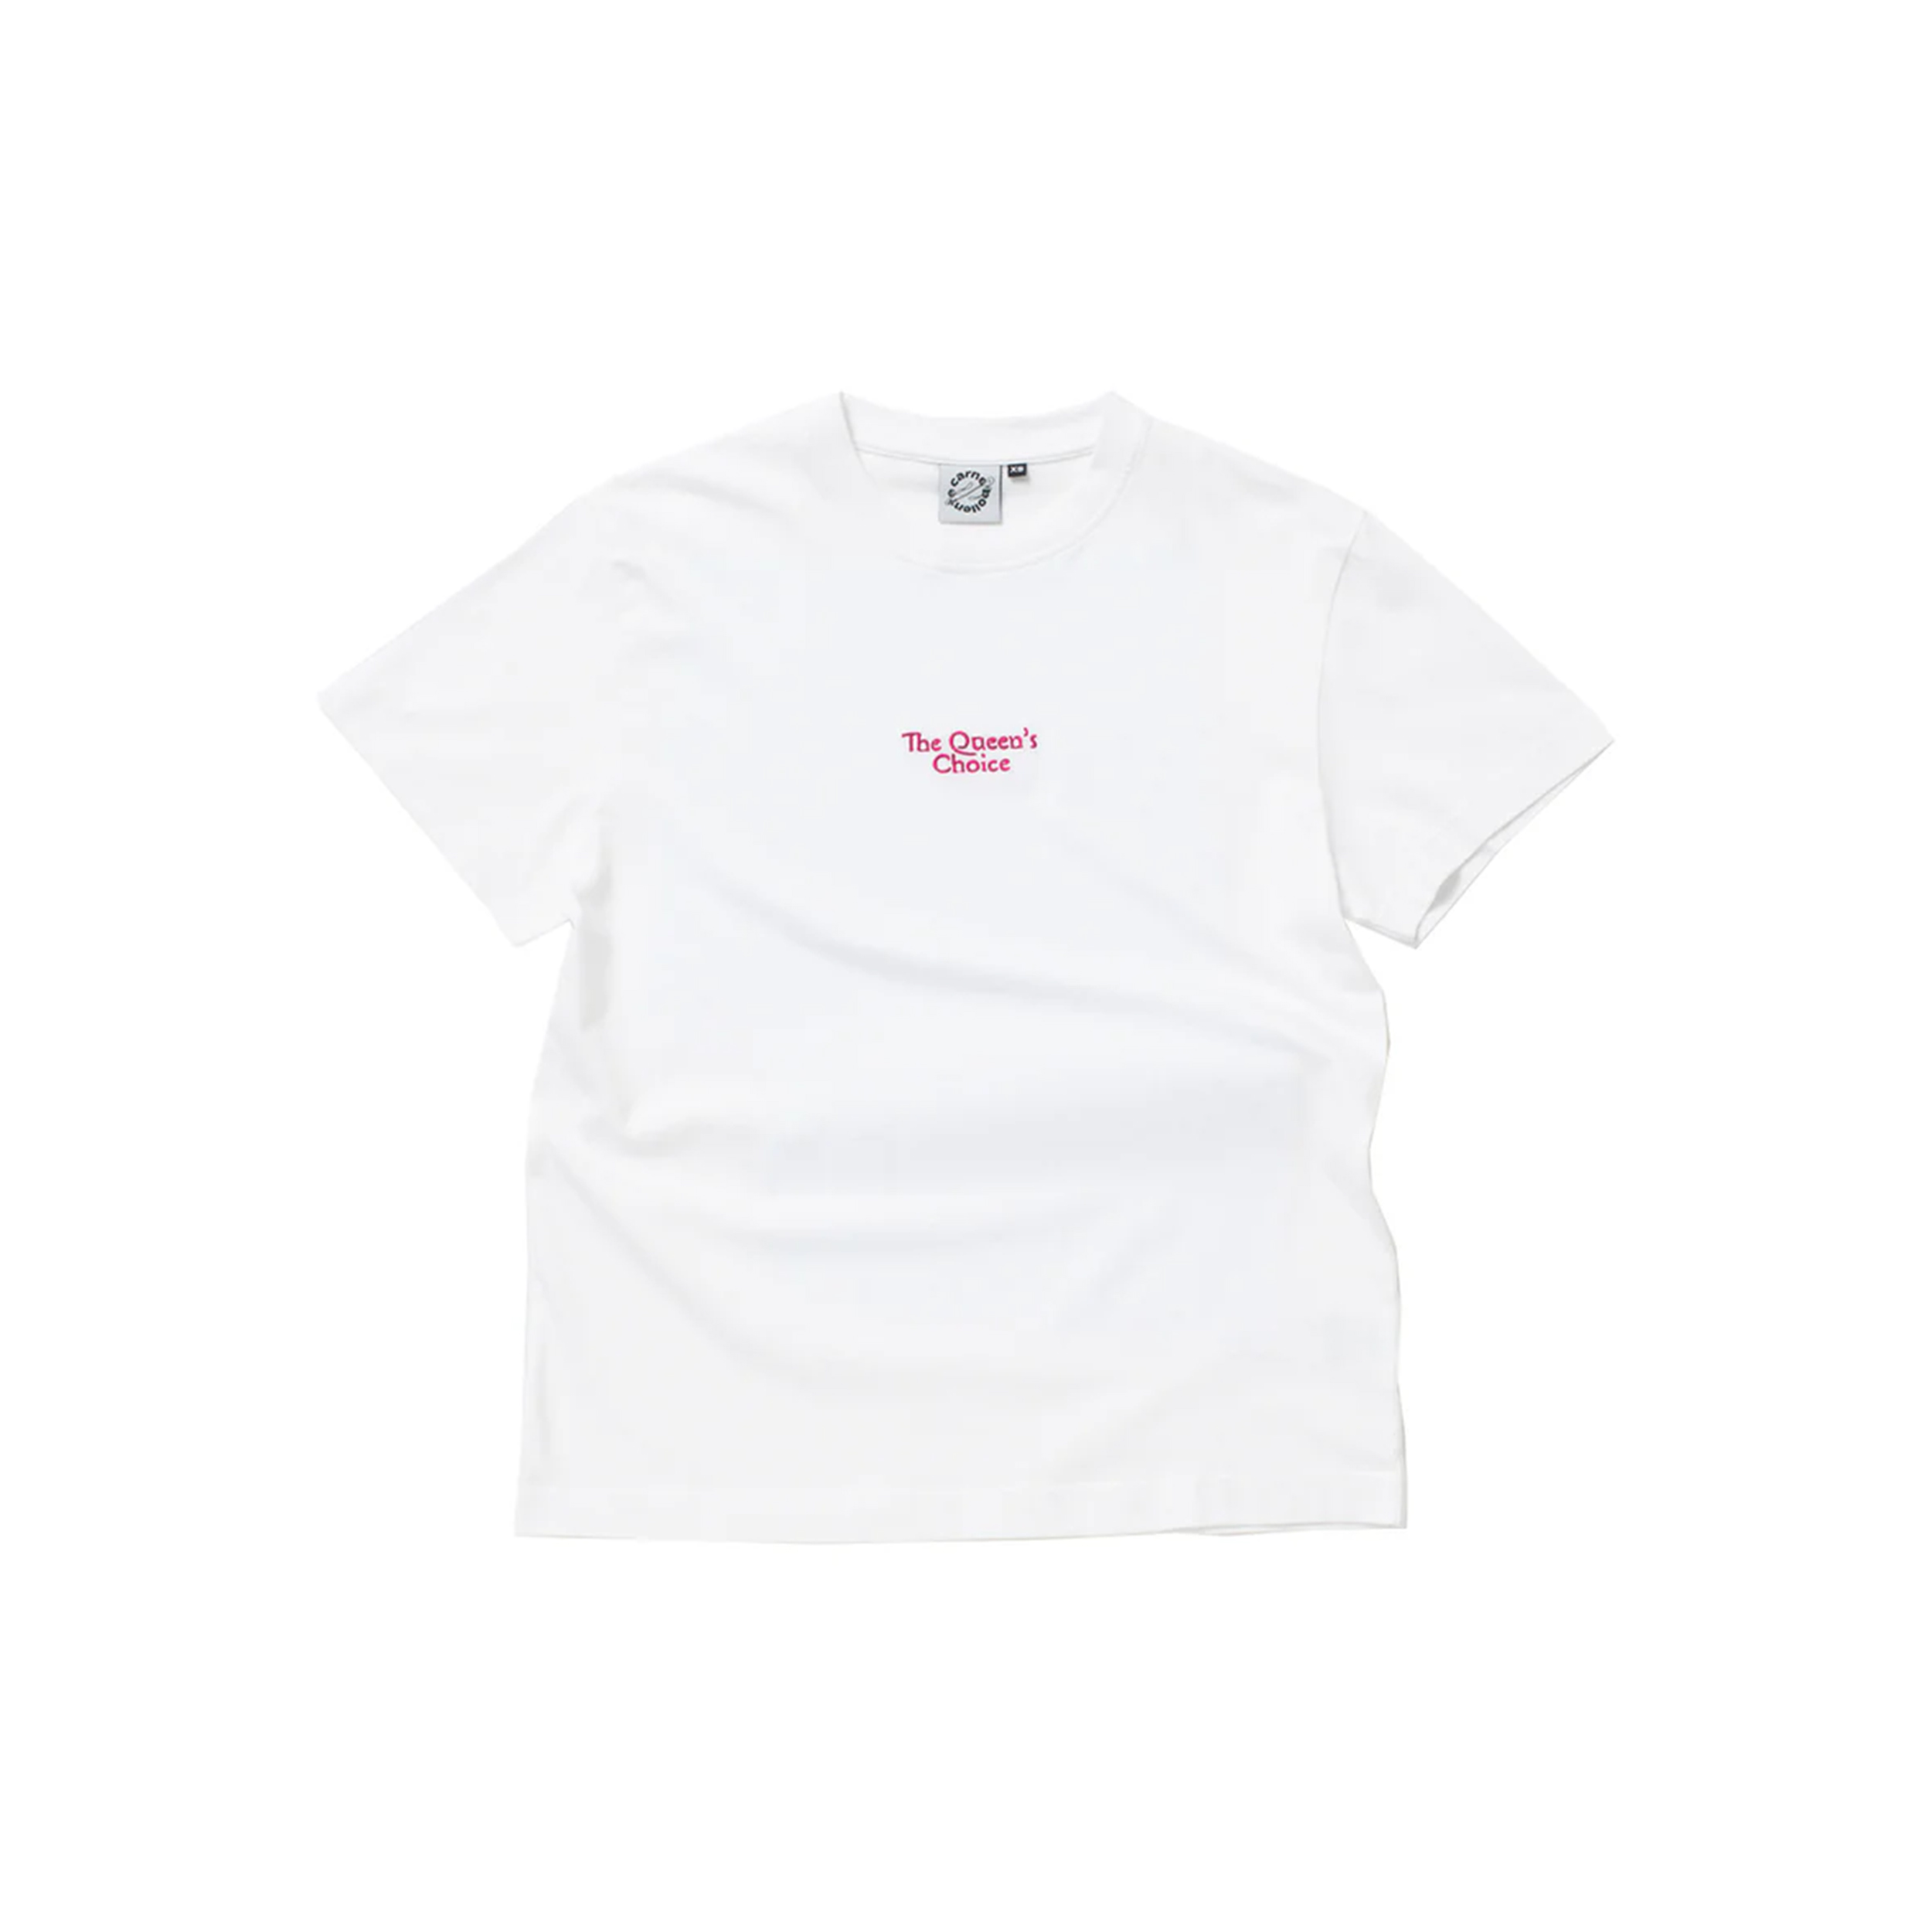 THE QUEEN’S CHOICE TEE – WHITE - Siwilai